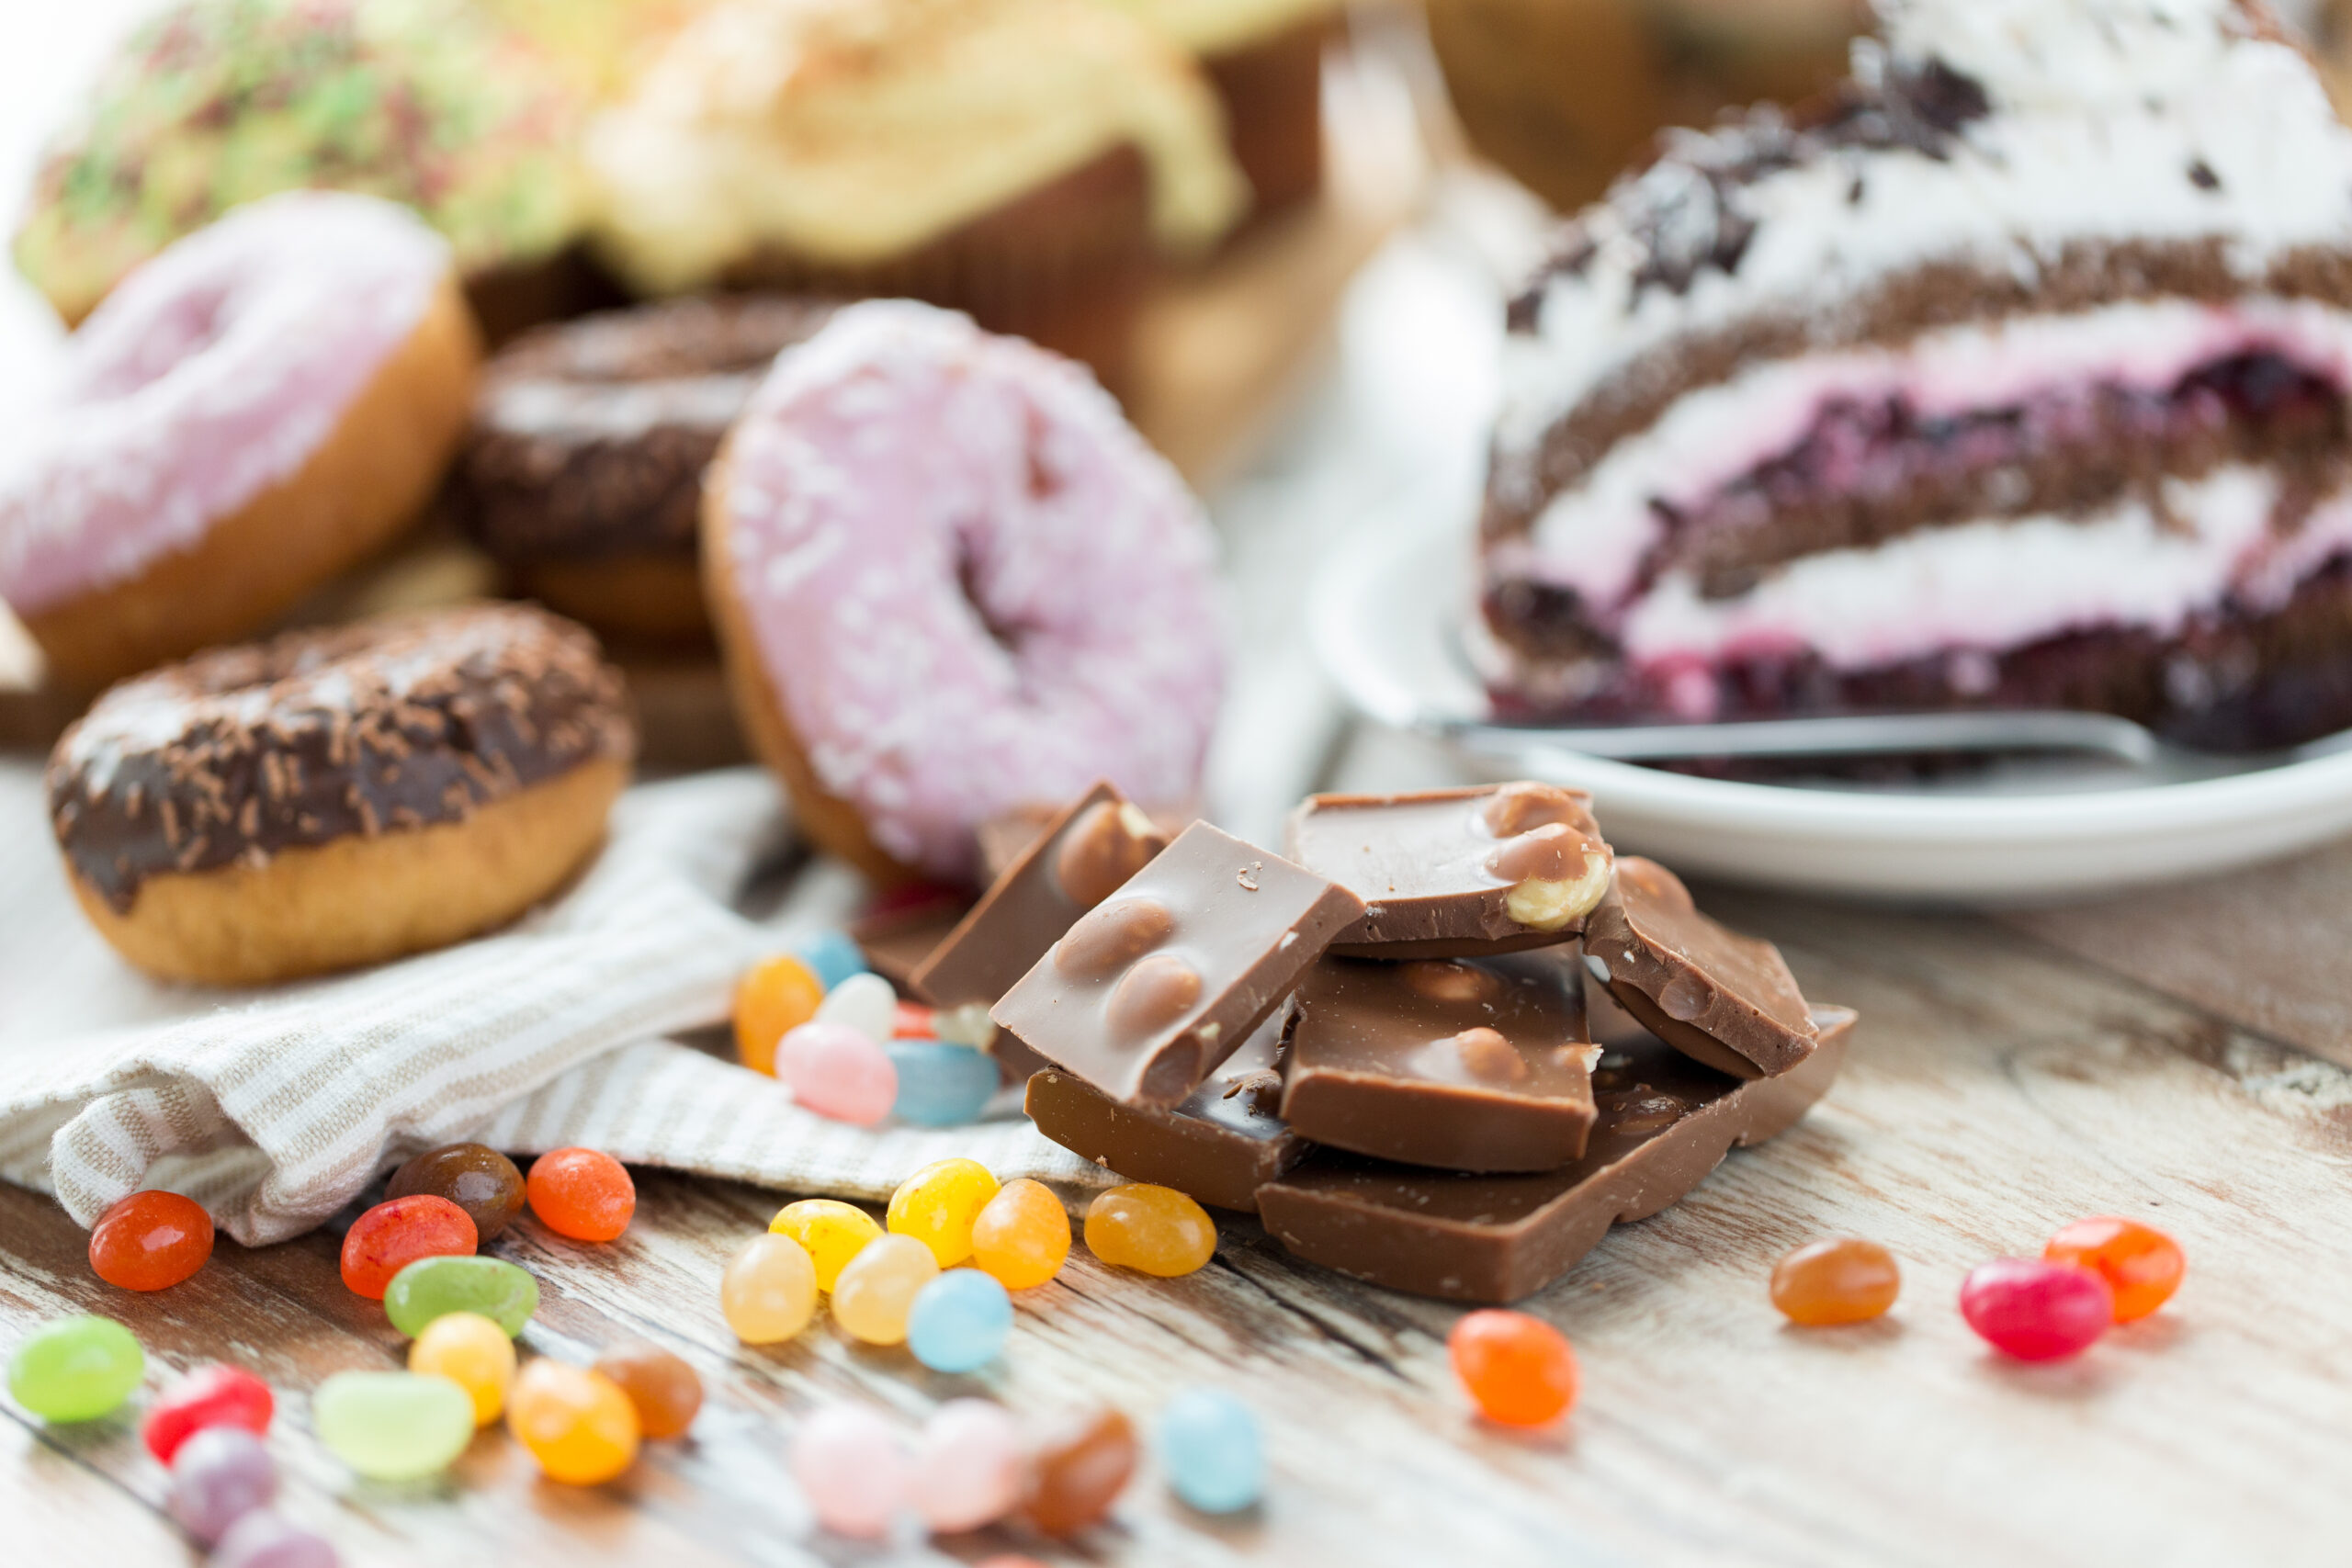 Why I Should Eliminate Sugary Foods in My Diet